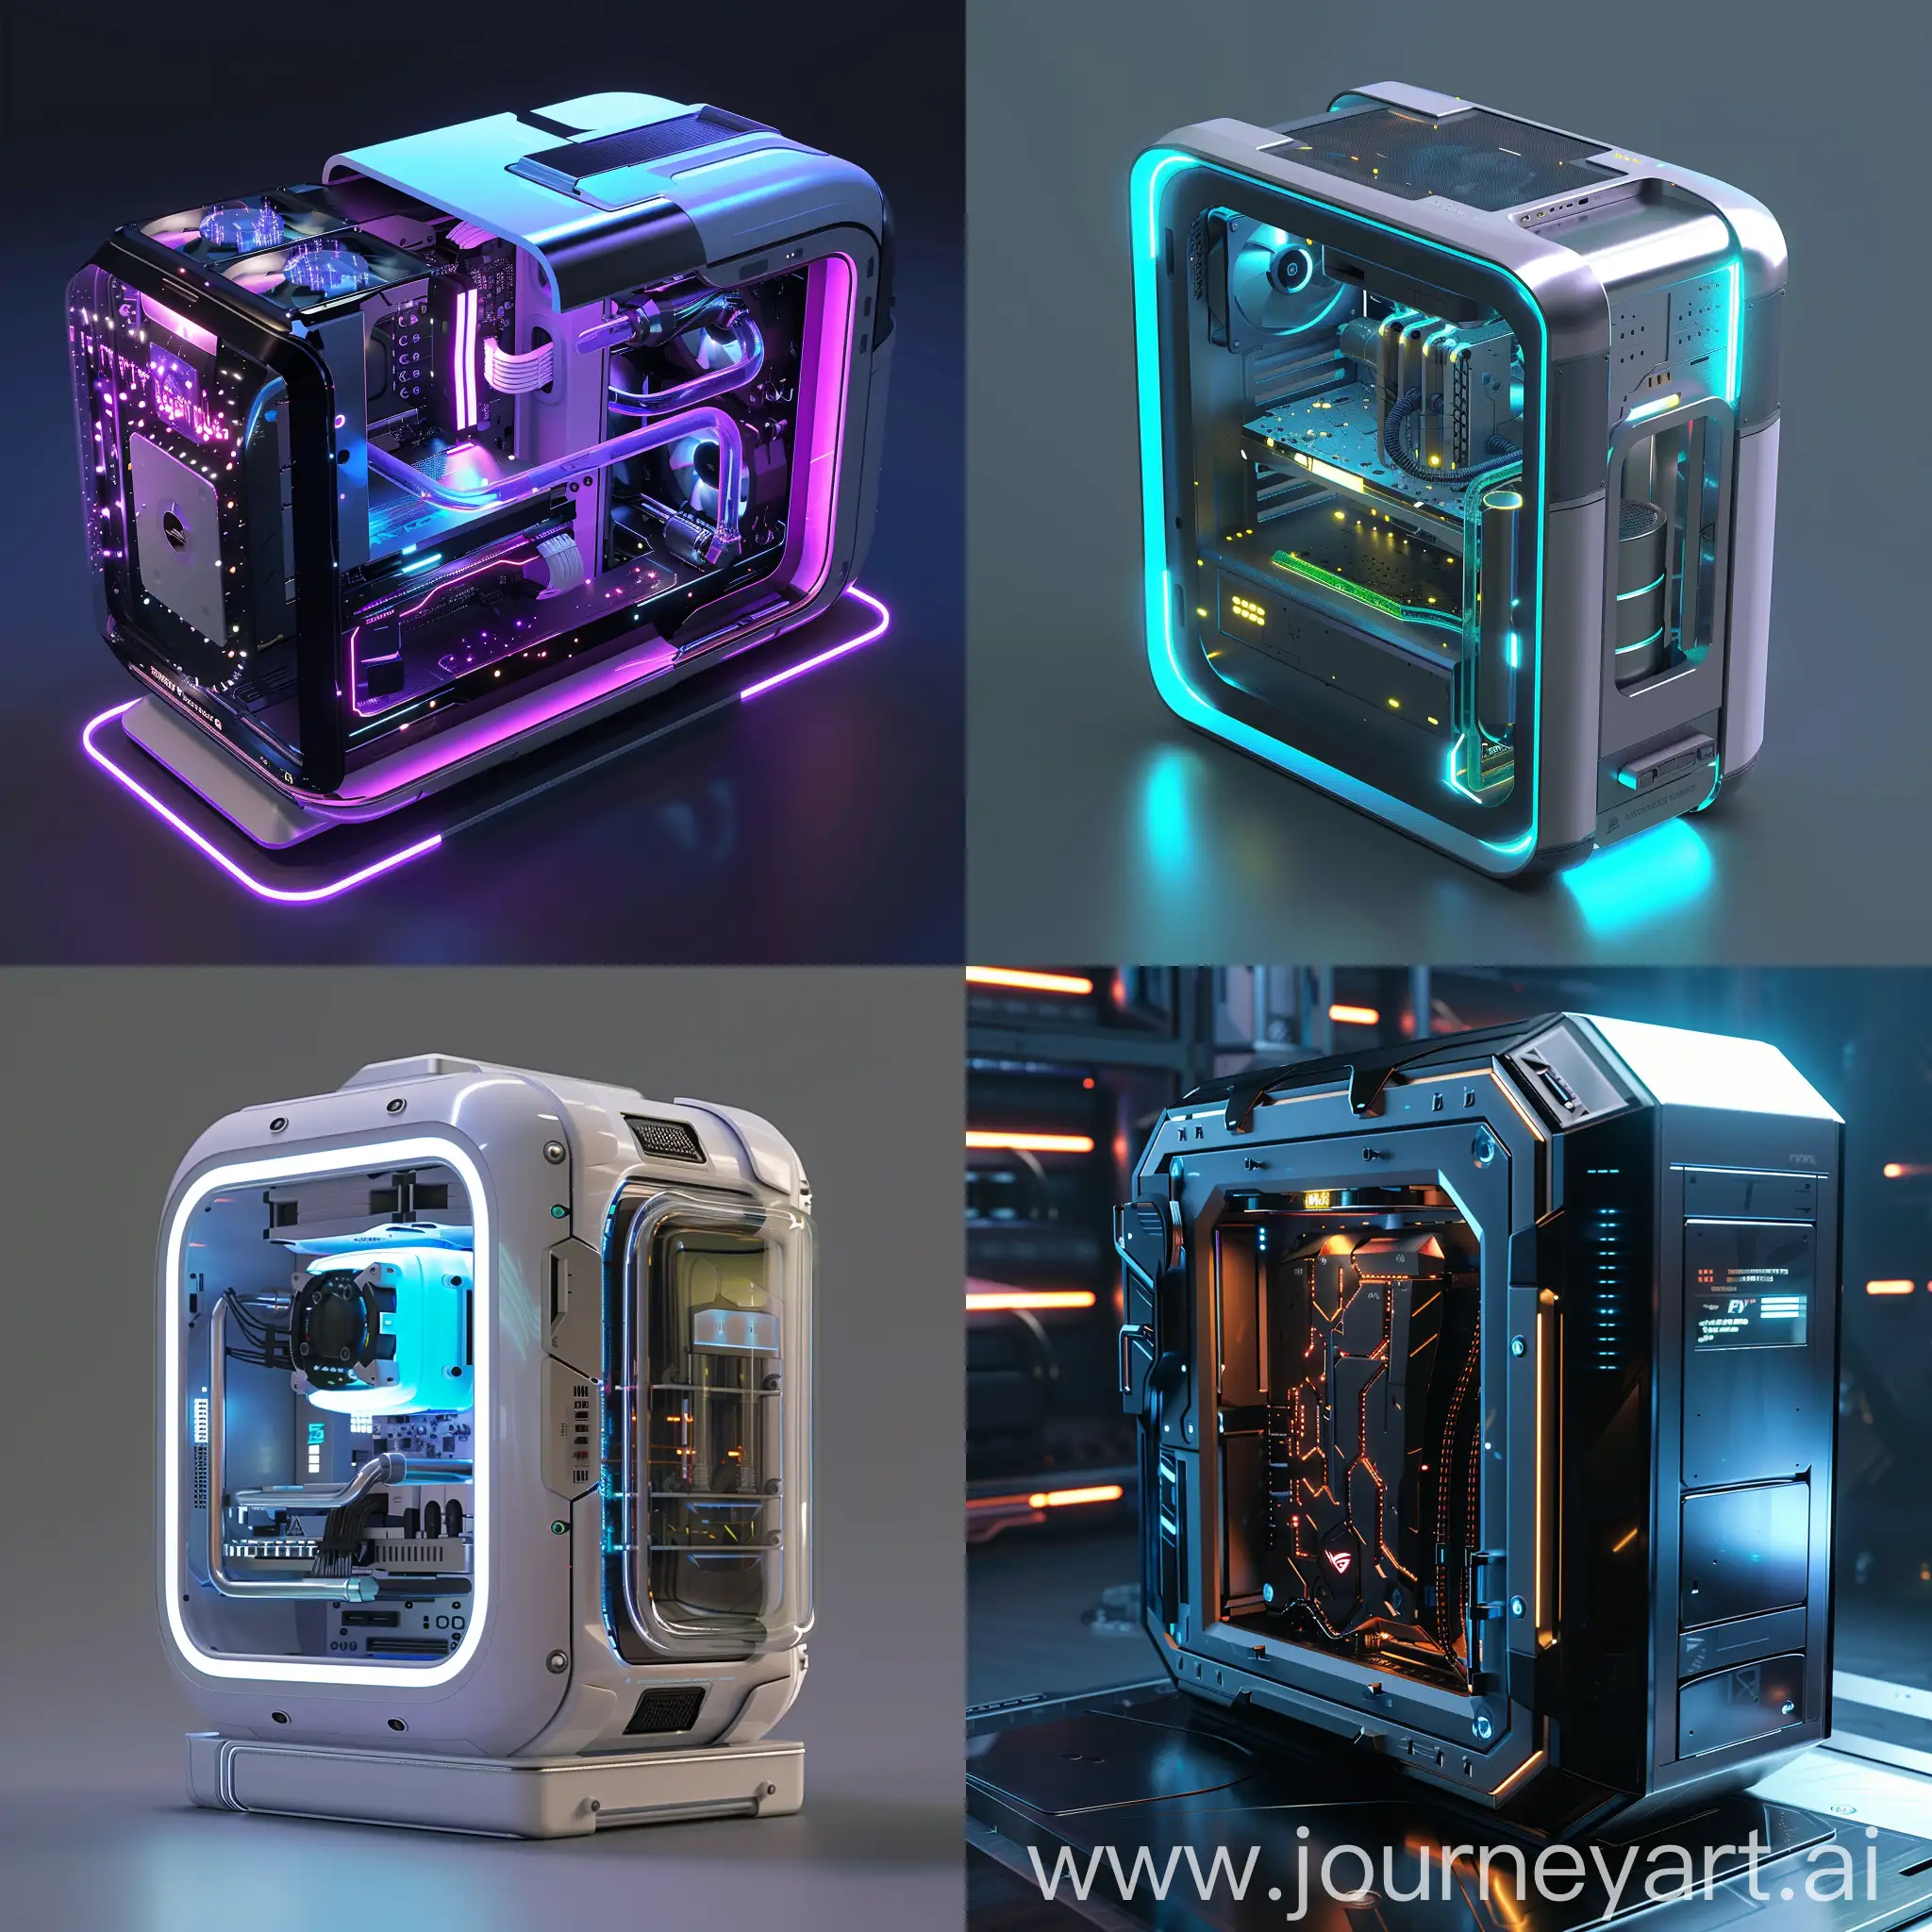 Futuristic-PC-Case-with-SelfCleaning-Surfaces-and-AIPowered-Cooling